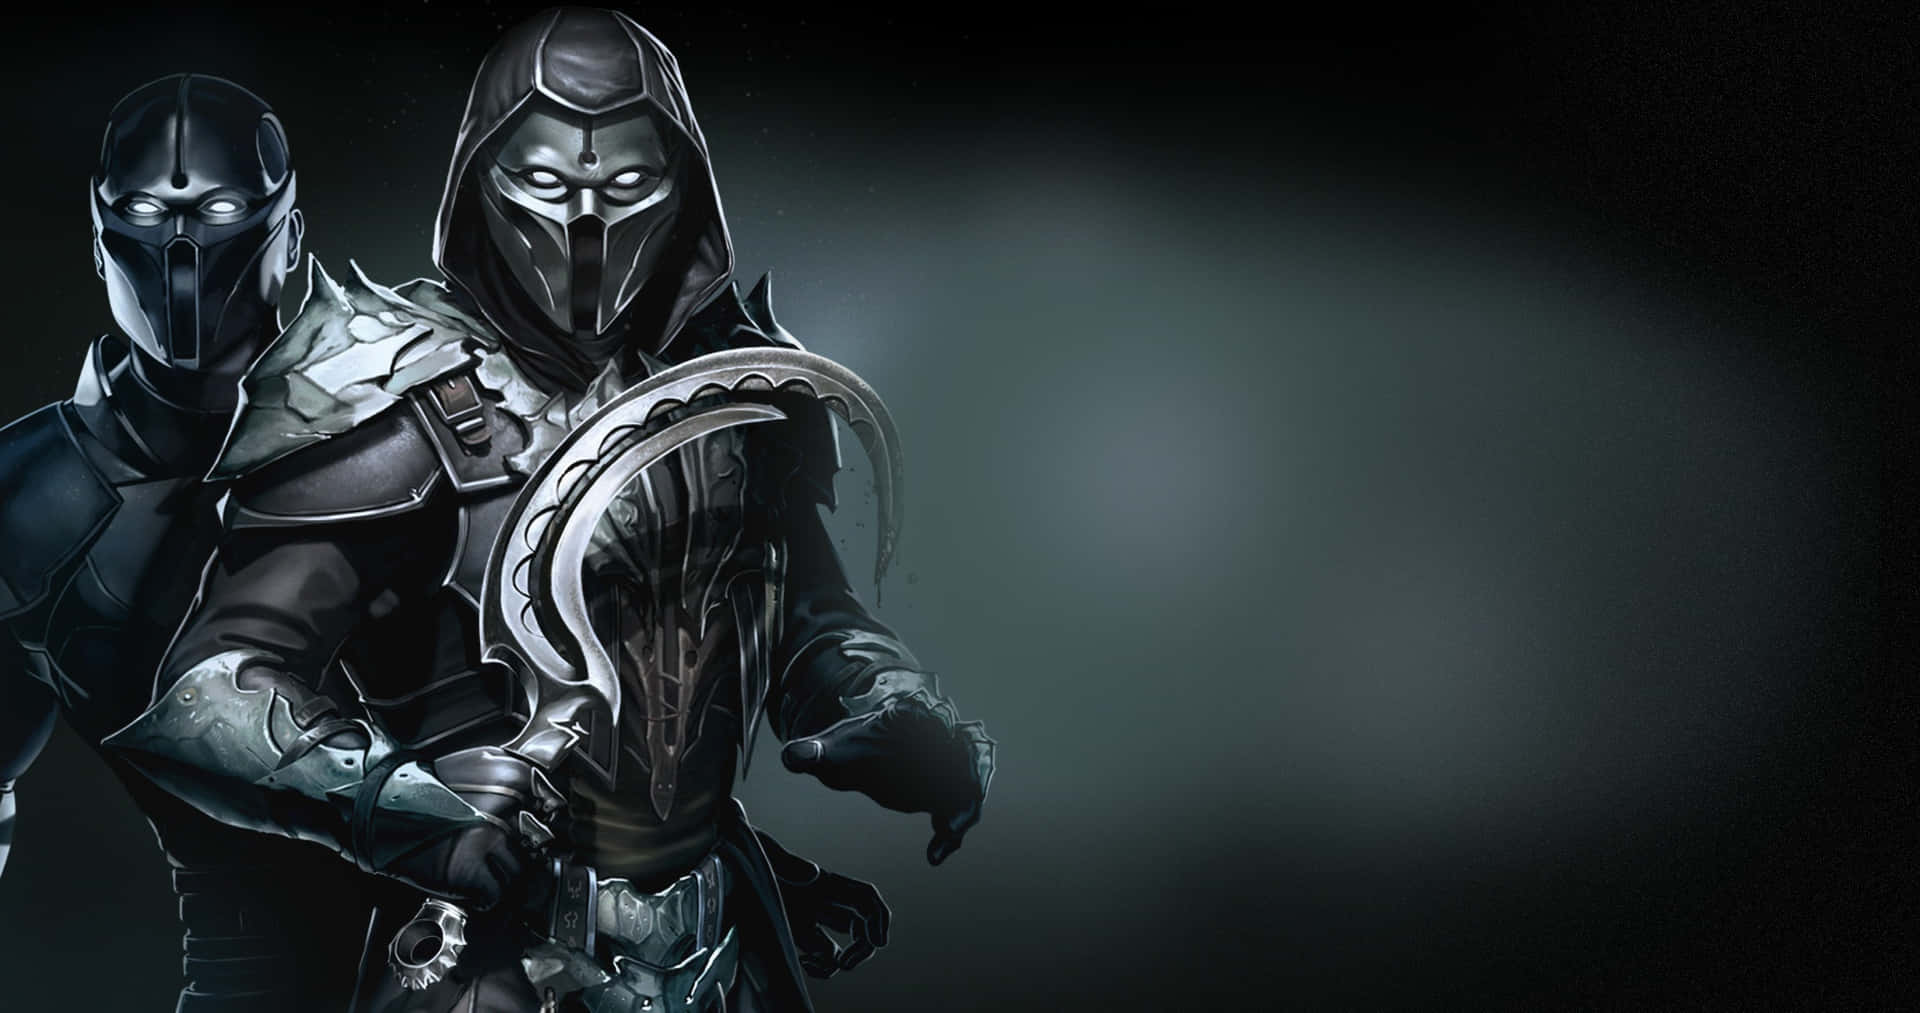 Noob Saibot stands ready for battle! Wallpaper